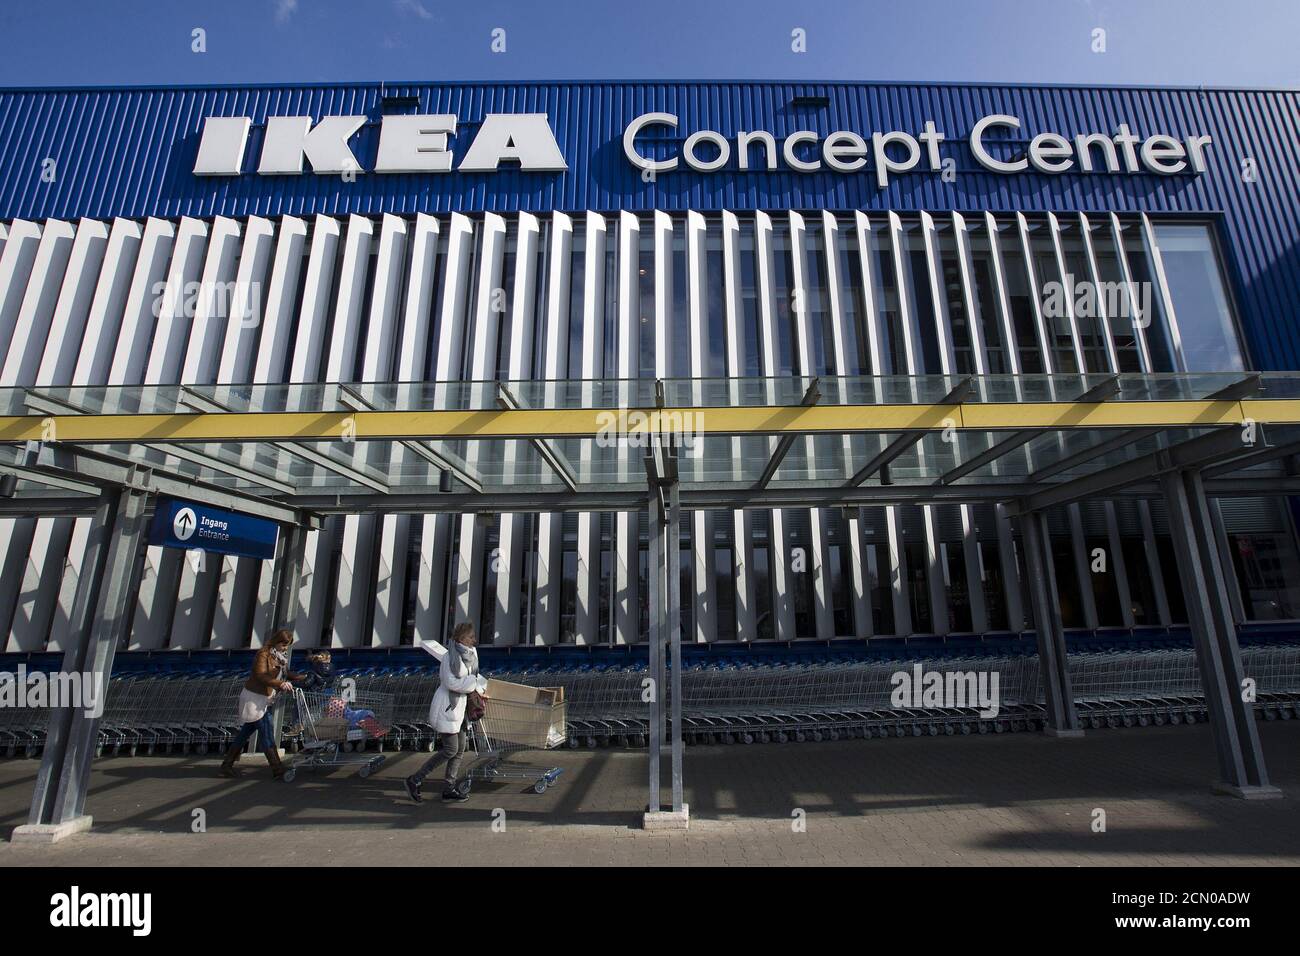 Shoppers walk outside the IKEA Concept Center, a furniture store and  headquarters of the IKEA brand owner Inter IKEA, in Delft, the Netherlands  March 16, 2016. REUTERS/Yves Herman Stock Photo - Alamy